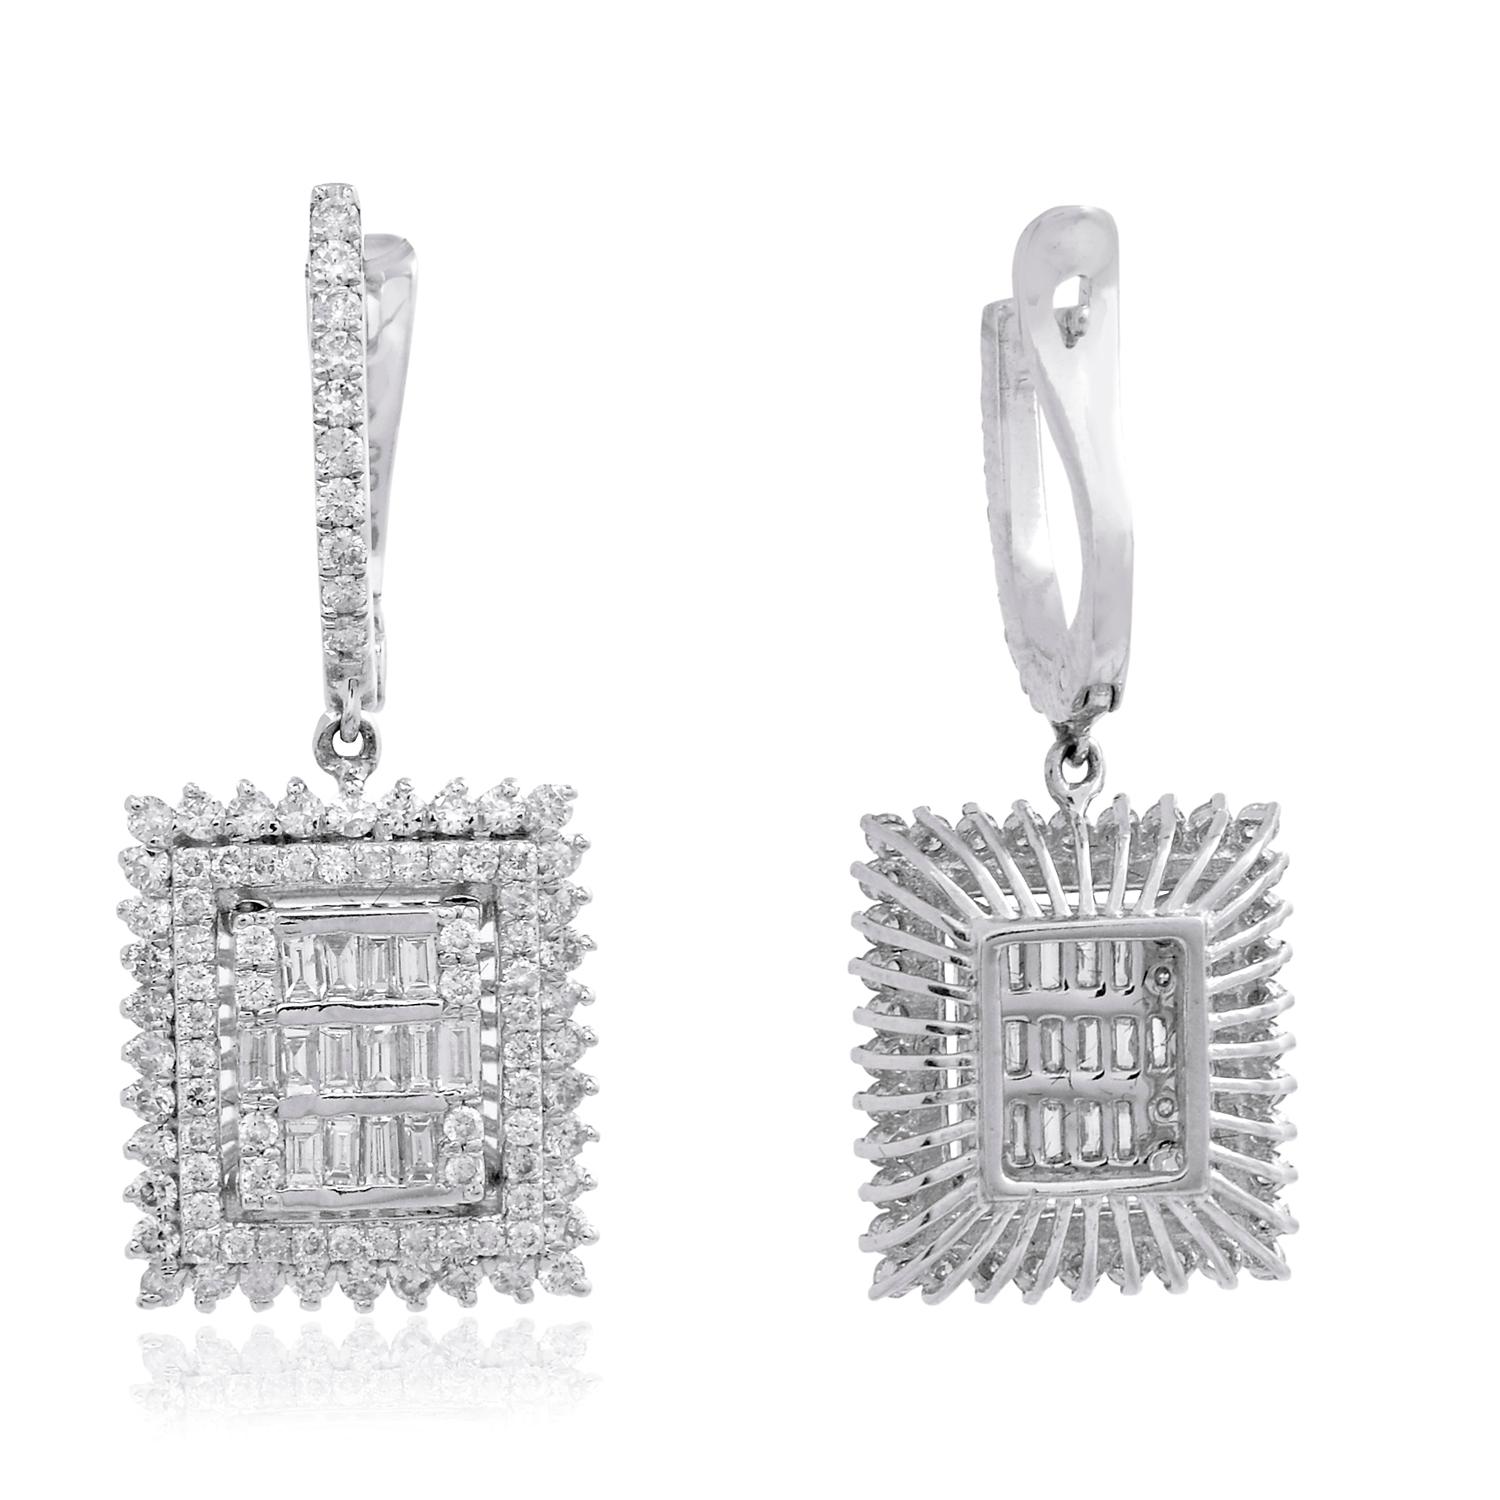 Item Code :- CN-19042
Gross Wt. :- 6.93 gm
18k White Gold Wt. :- 6.58 gm
Natural Diamond Wt. :- 1.75 Ct. ( AVERAGE DIAMOND CLARITY SI1-SI2 & COLOR H-I )
Earrings Size :- 28.65 x 12.37 mm approx.

✦ Sizing
.....................
We can adjust most